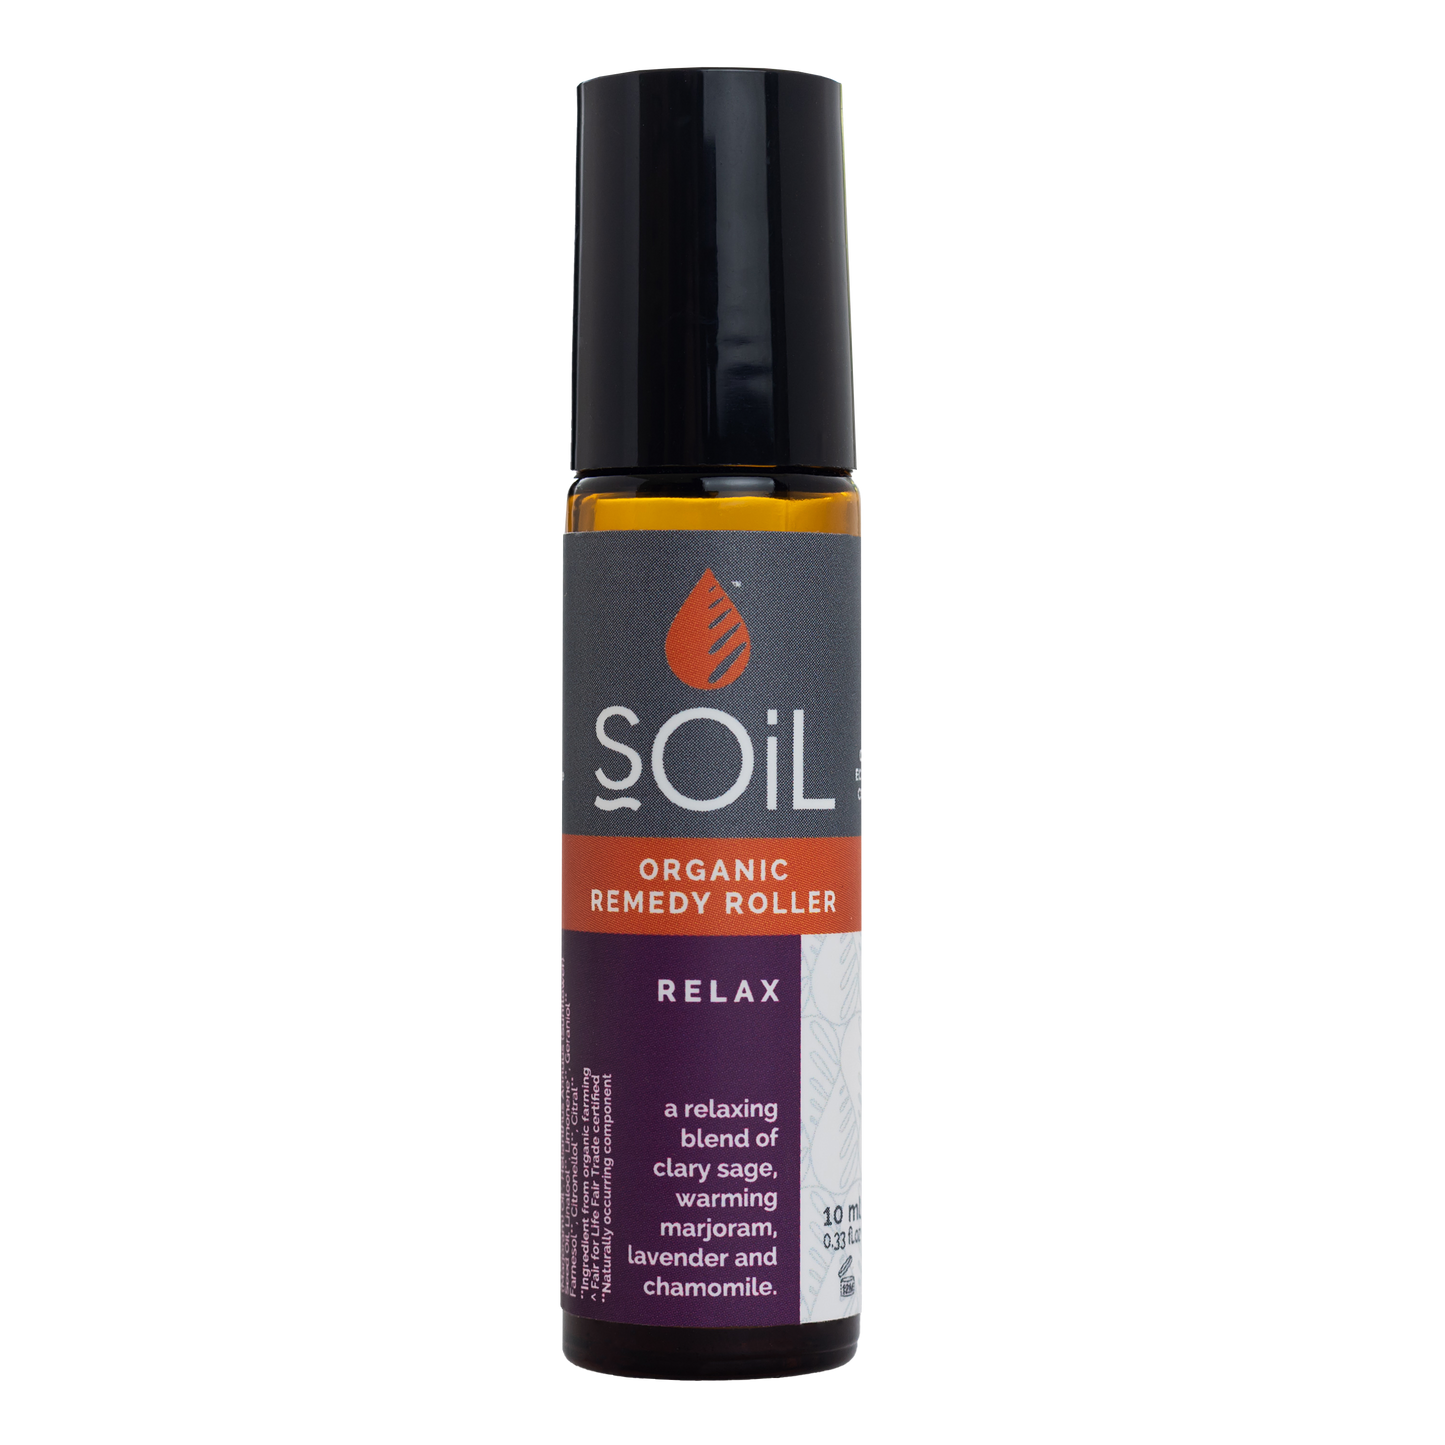 Relax - Organic Remedy Roller by SOiL Organic Aromatherapy and Skincare